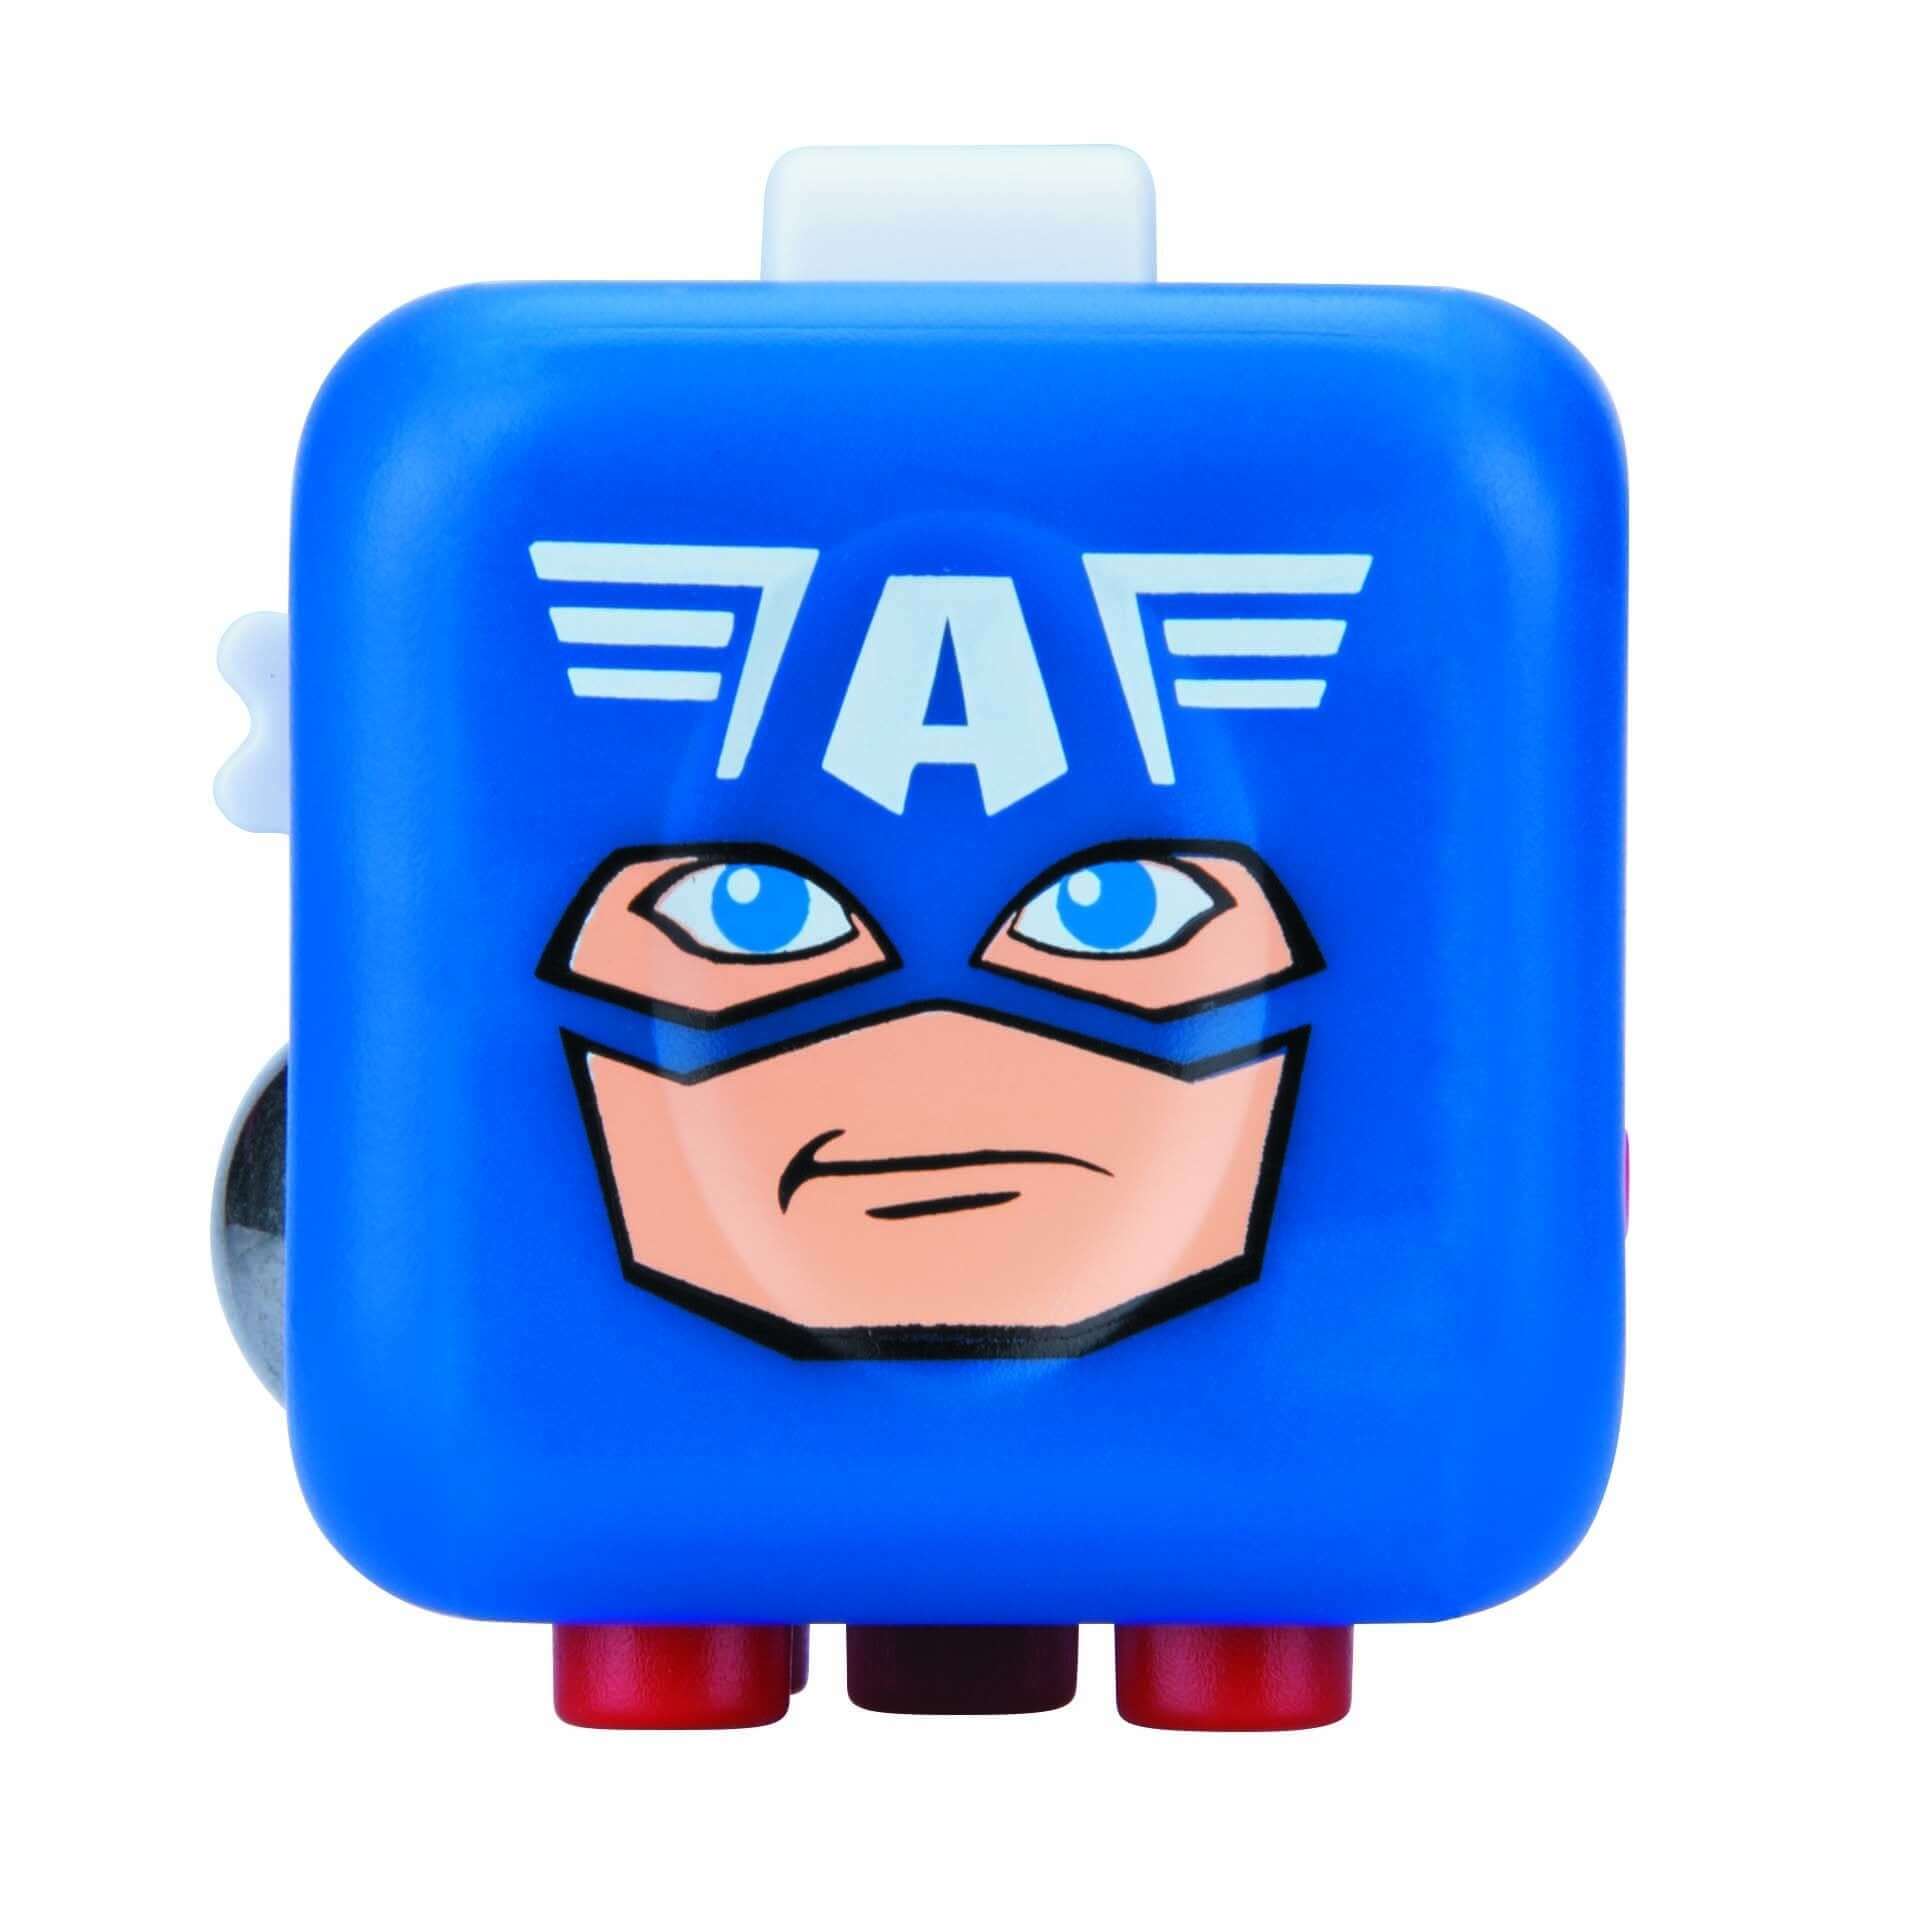 Get Your Marvel Fidget Spinner at the Home of Fidget Cube